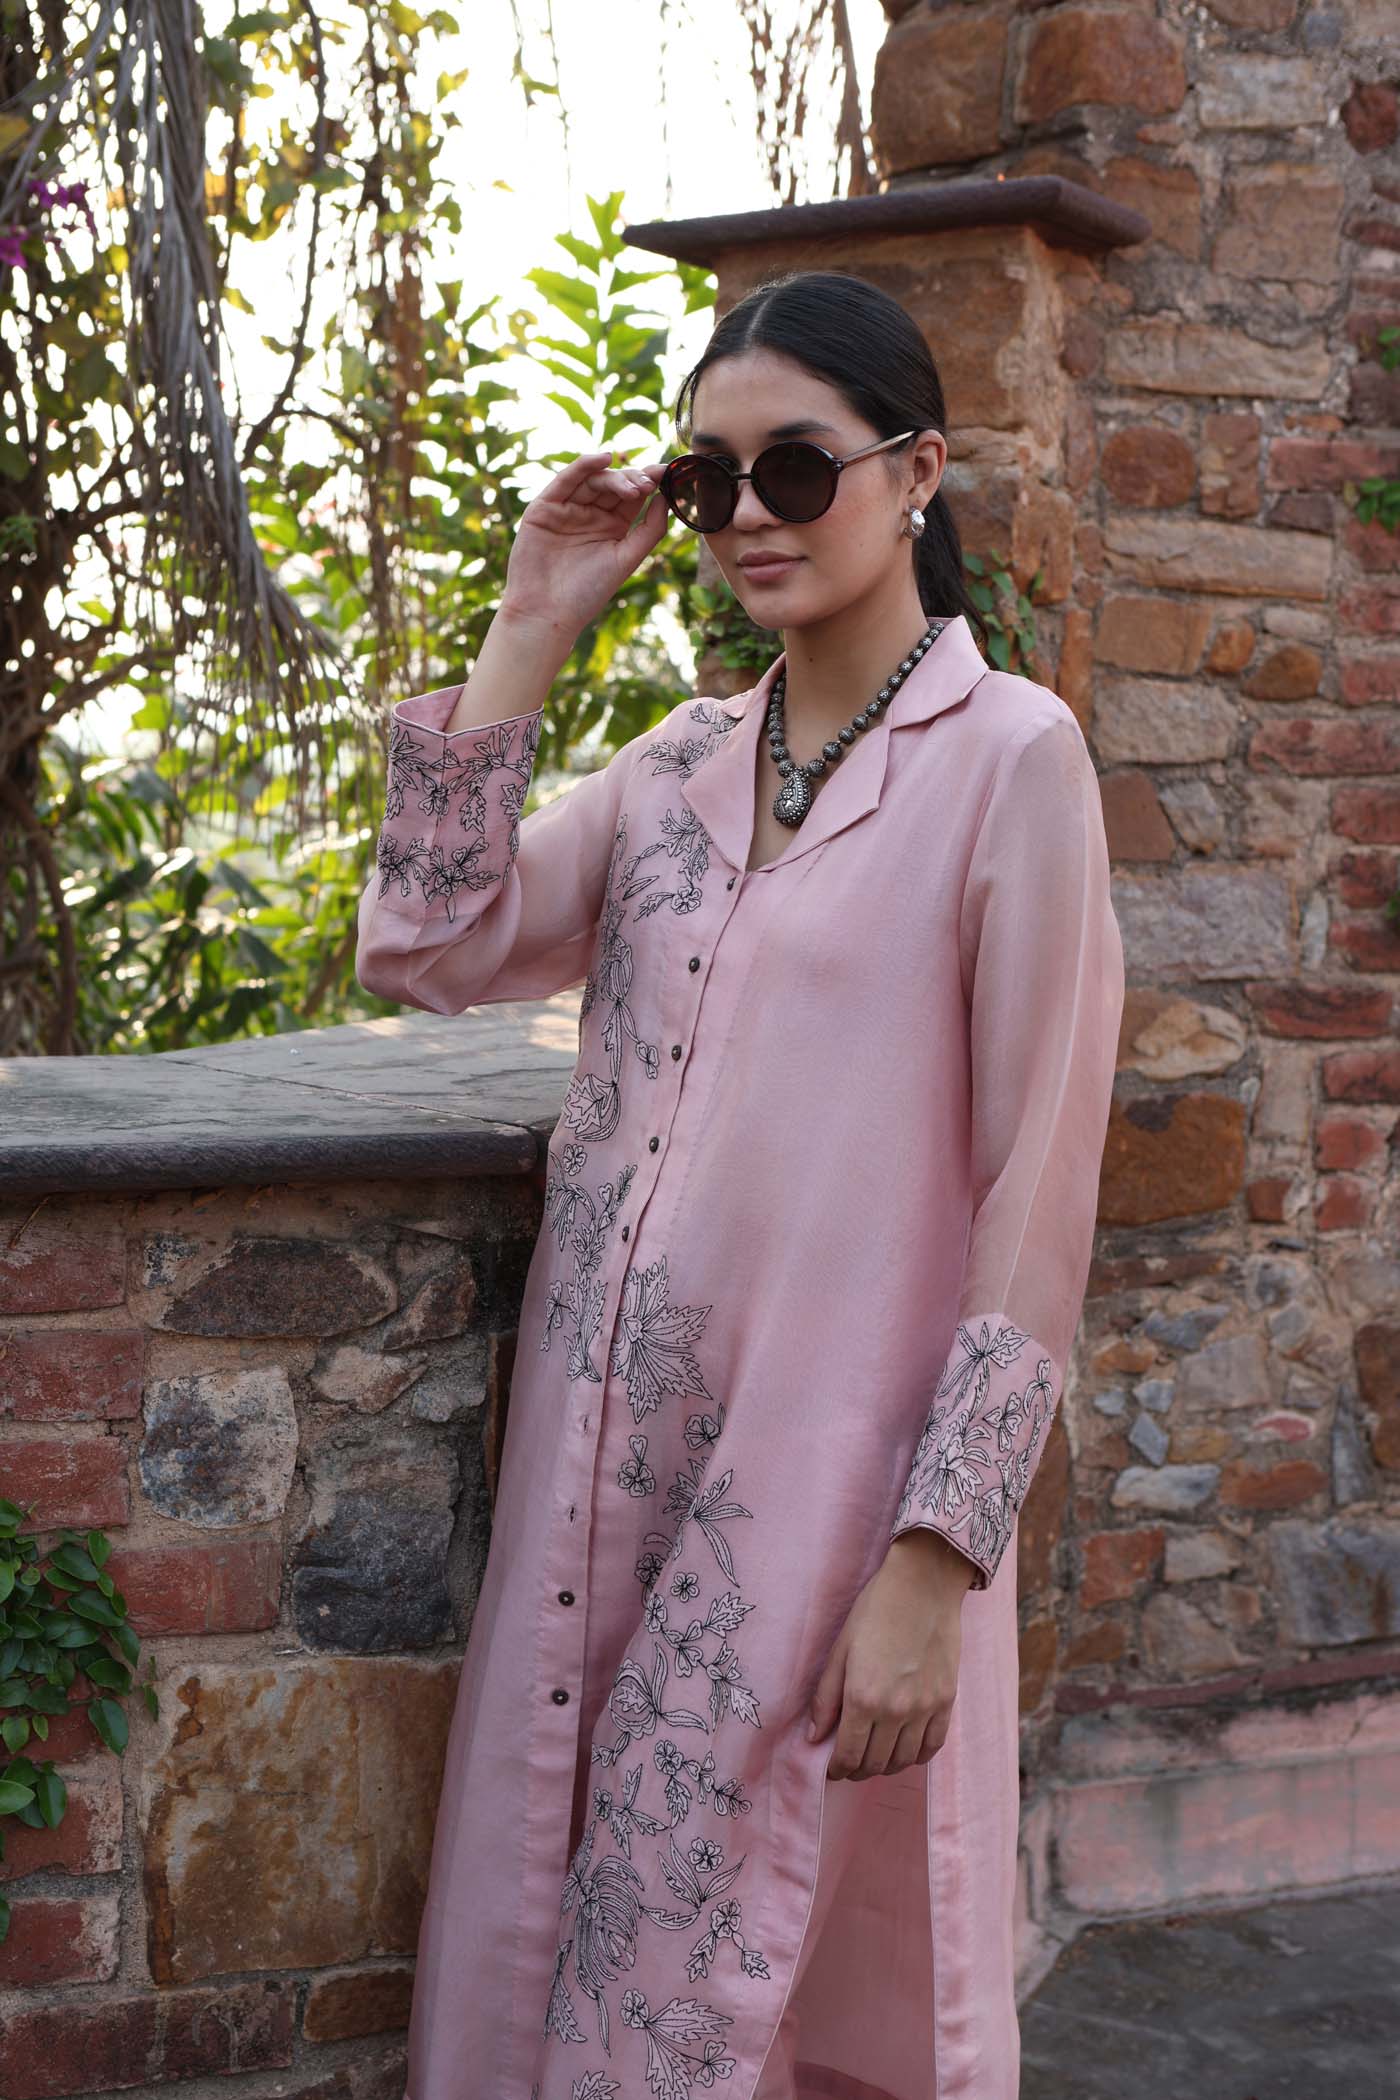 Dusty-Pink Pure Silk Organza Embroidered (Applique & Cuwork) Short-Sleeved Front- Open Collared Kurta-Pants Set